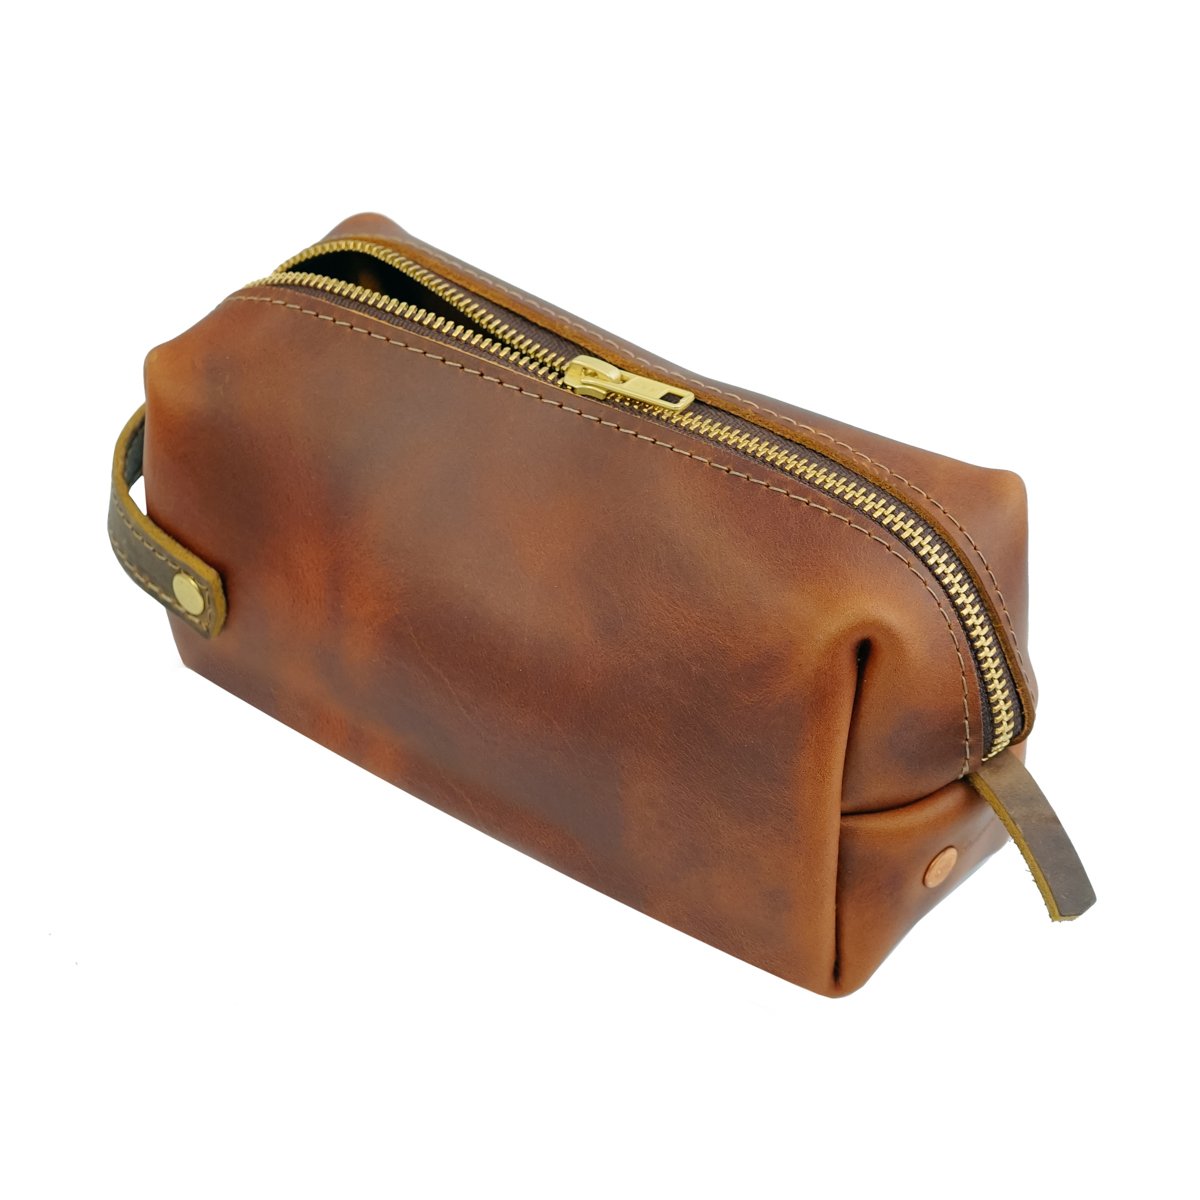 Canvas and Leather Toiletry Bag | Travel Dopp Kit | Made in the USA Full  Grain Leather and Quality Cotton Canvas | Great Gift | Unisex Toiletry Bag  | Fully Lined | Functional Travel Bag - Walmart.com